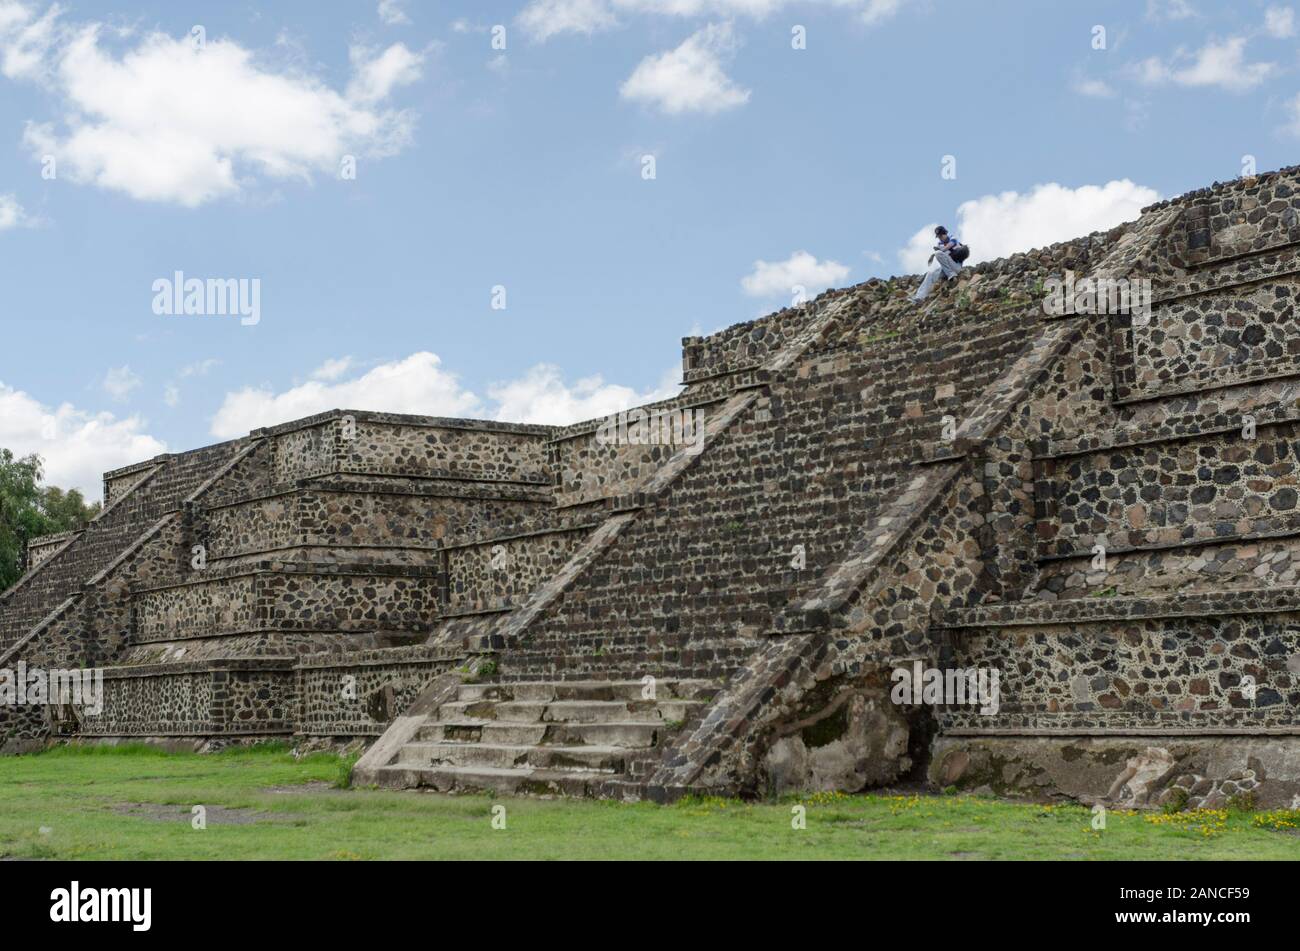 Platforms along the Avenue of the Dead showing the talud-tablero architectural style, in Teotihuacan, an ancient Mesoamerican city located in a sub-va Stock Photo